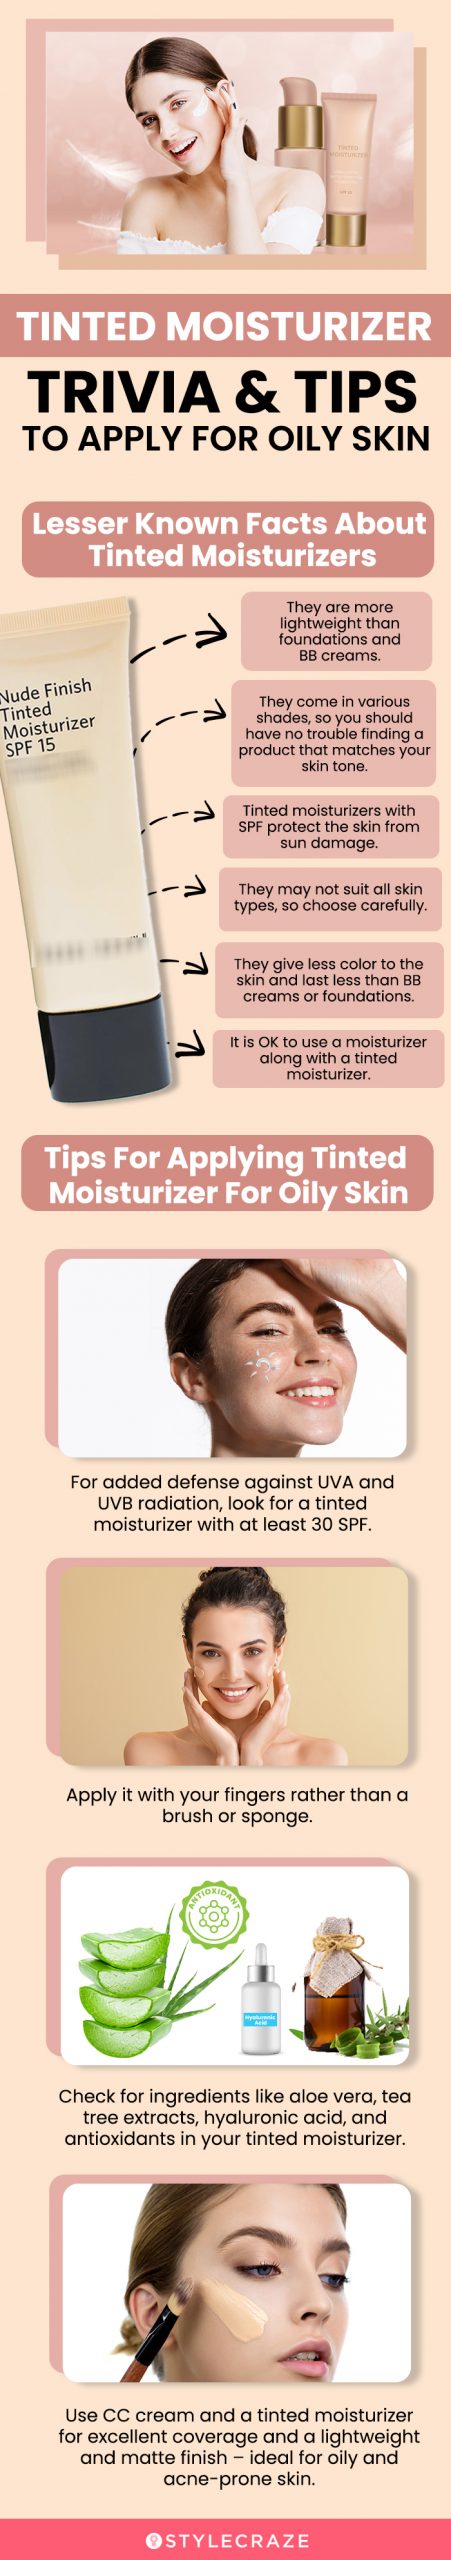 Tinted Moisturizer – Trivia & Tips To Apply For Oily Skin [infographic]